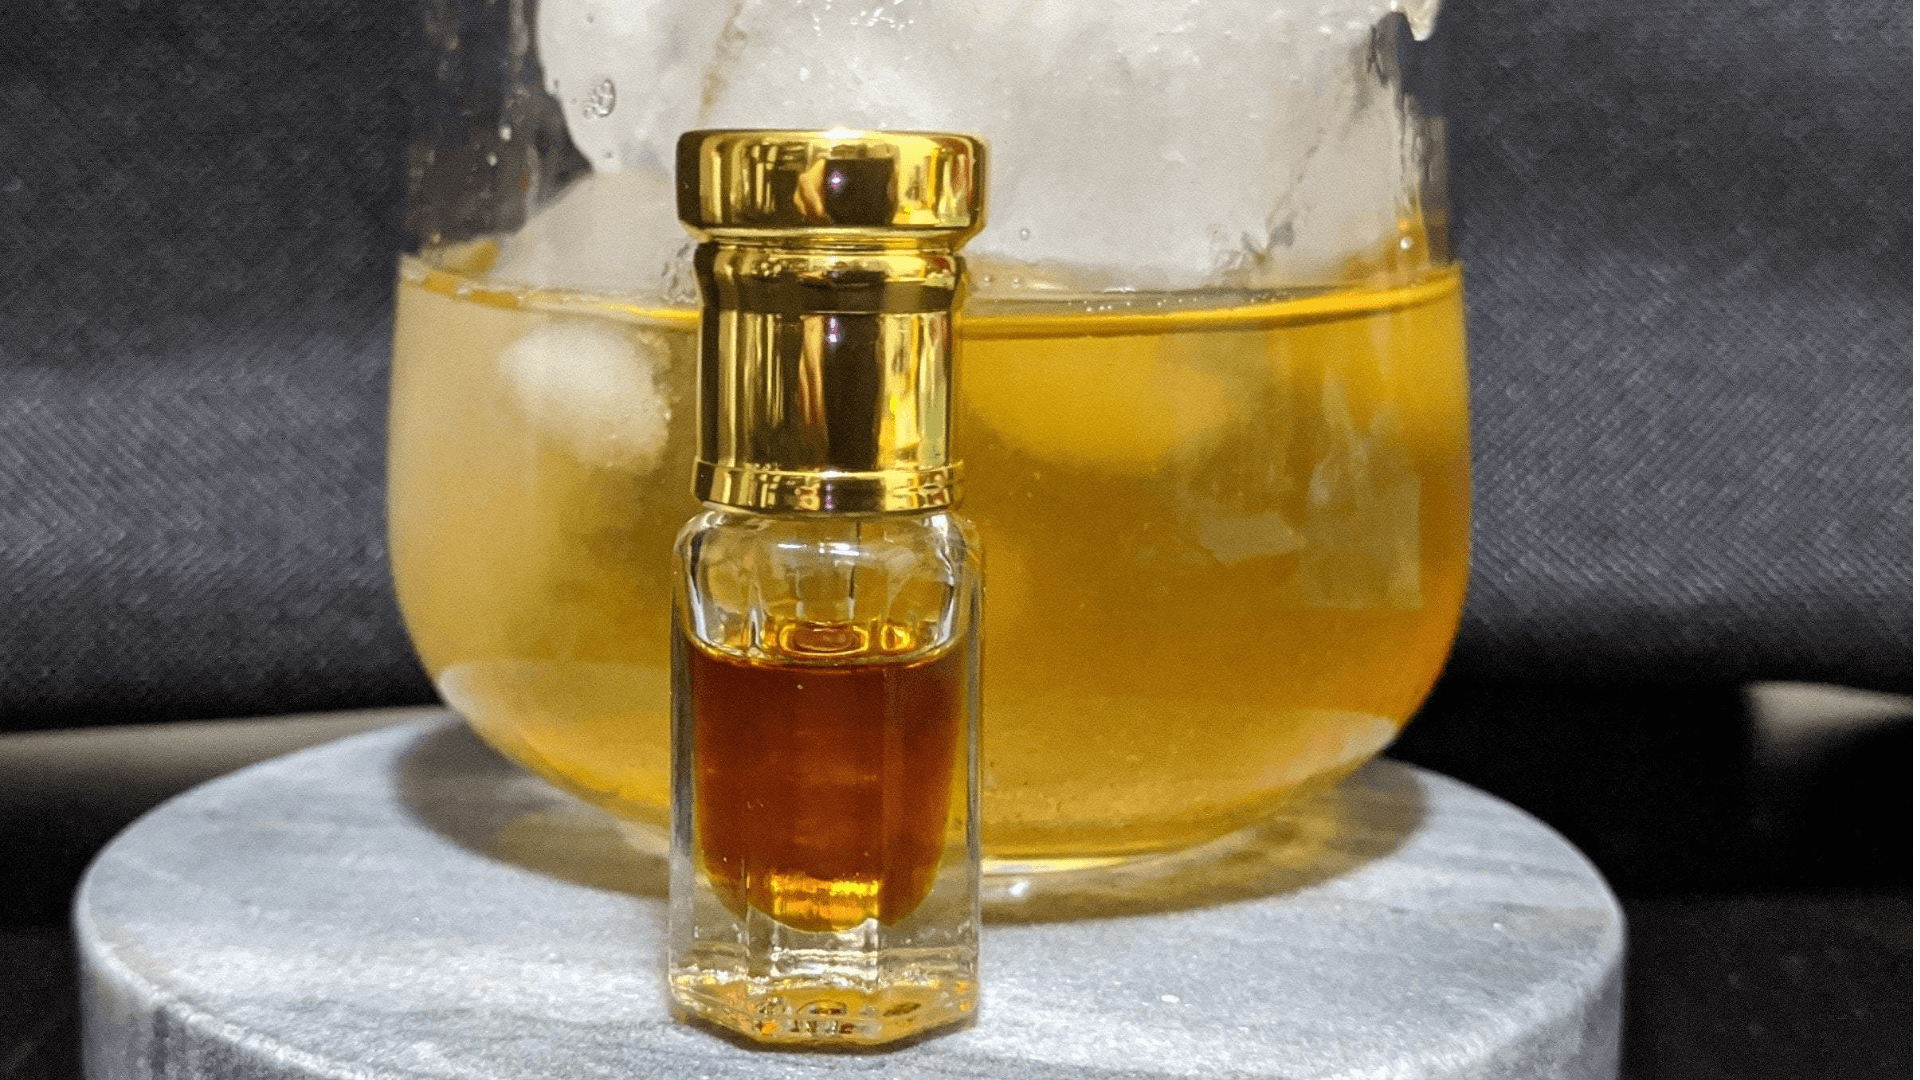 The Peated Oud - 100% Pure Cultivated "brewed" Oud Oil -